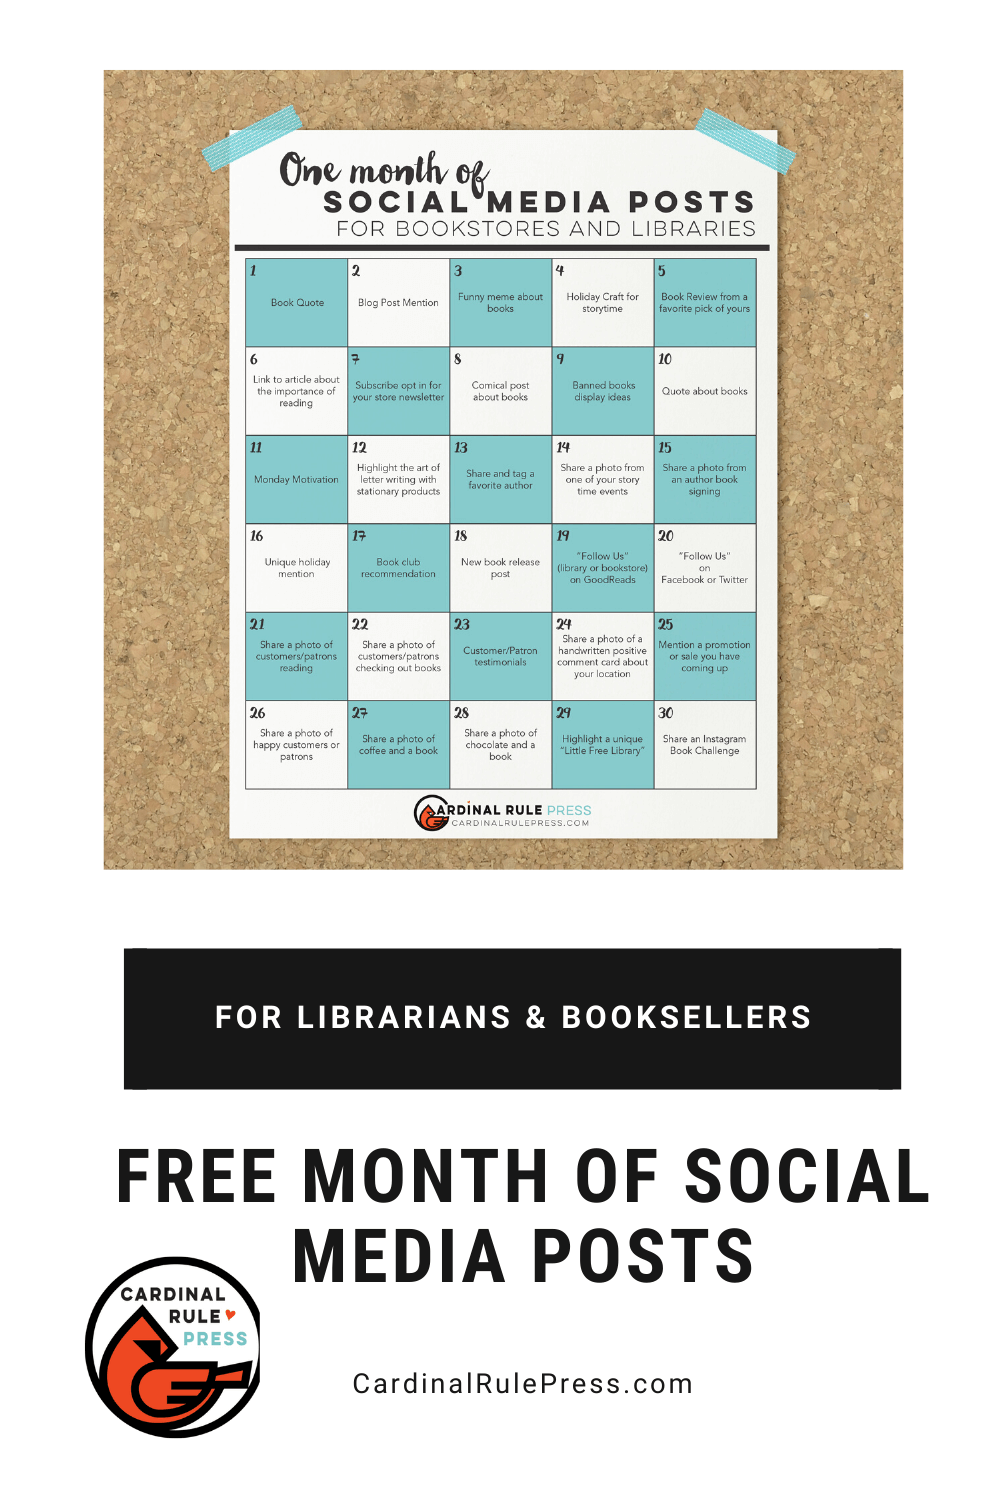 7 Ways to Boost Your Book Sales This Holiday Season. Don’t forget to download your FREE One-Month of Social Media Posts! #HolidaySeason #SocialMedia #FreeDownload